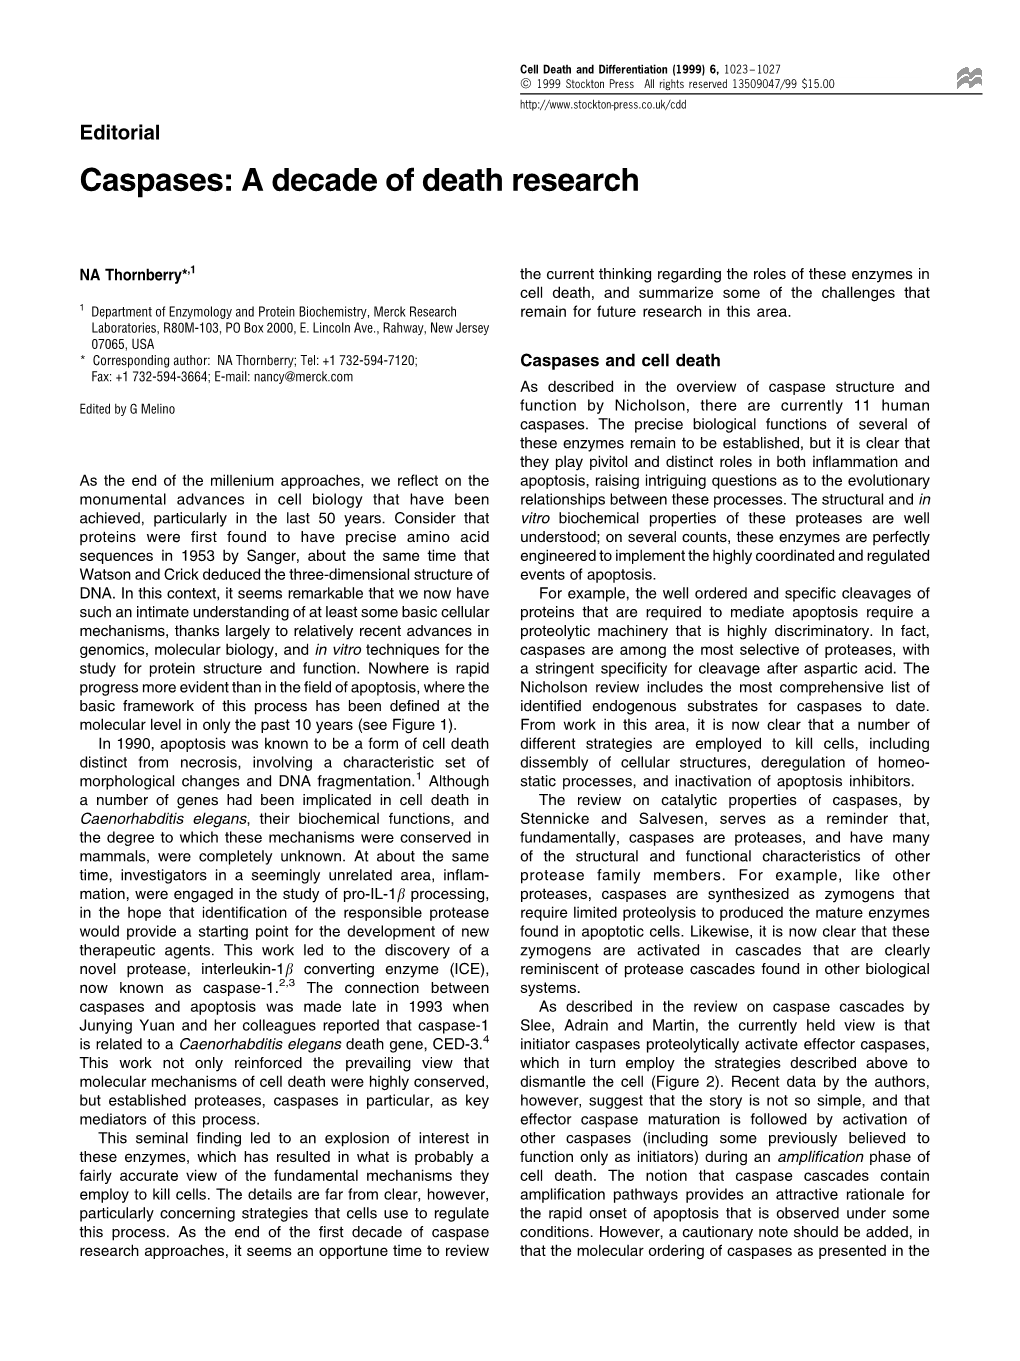 Caspases: a Decade of Death Research